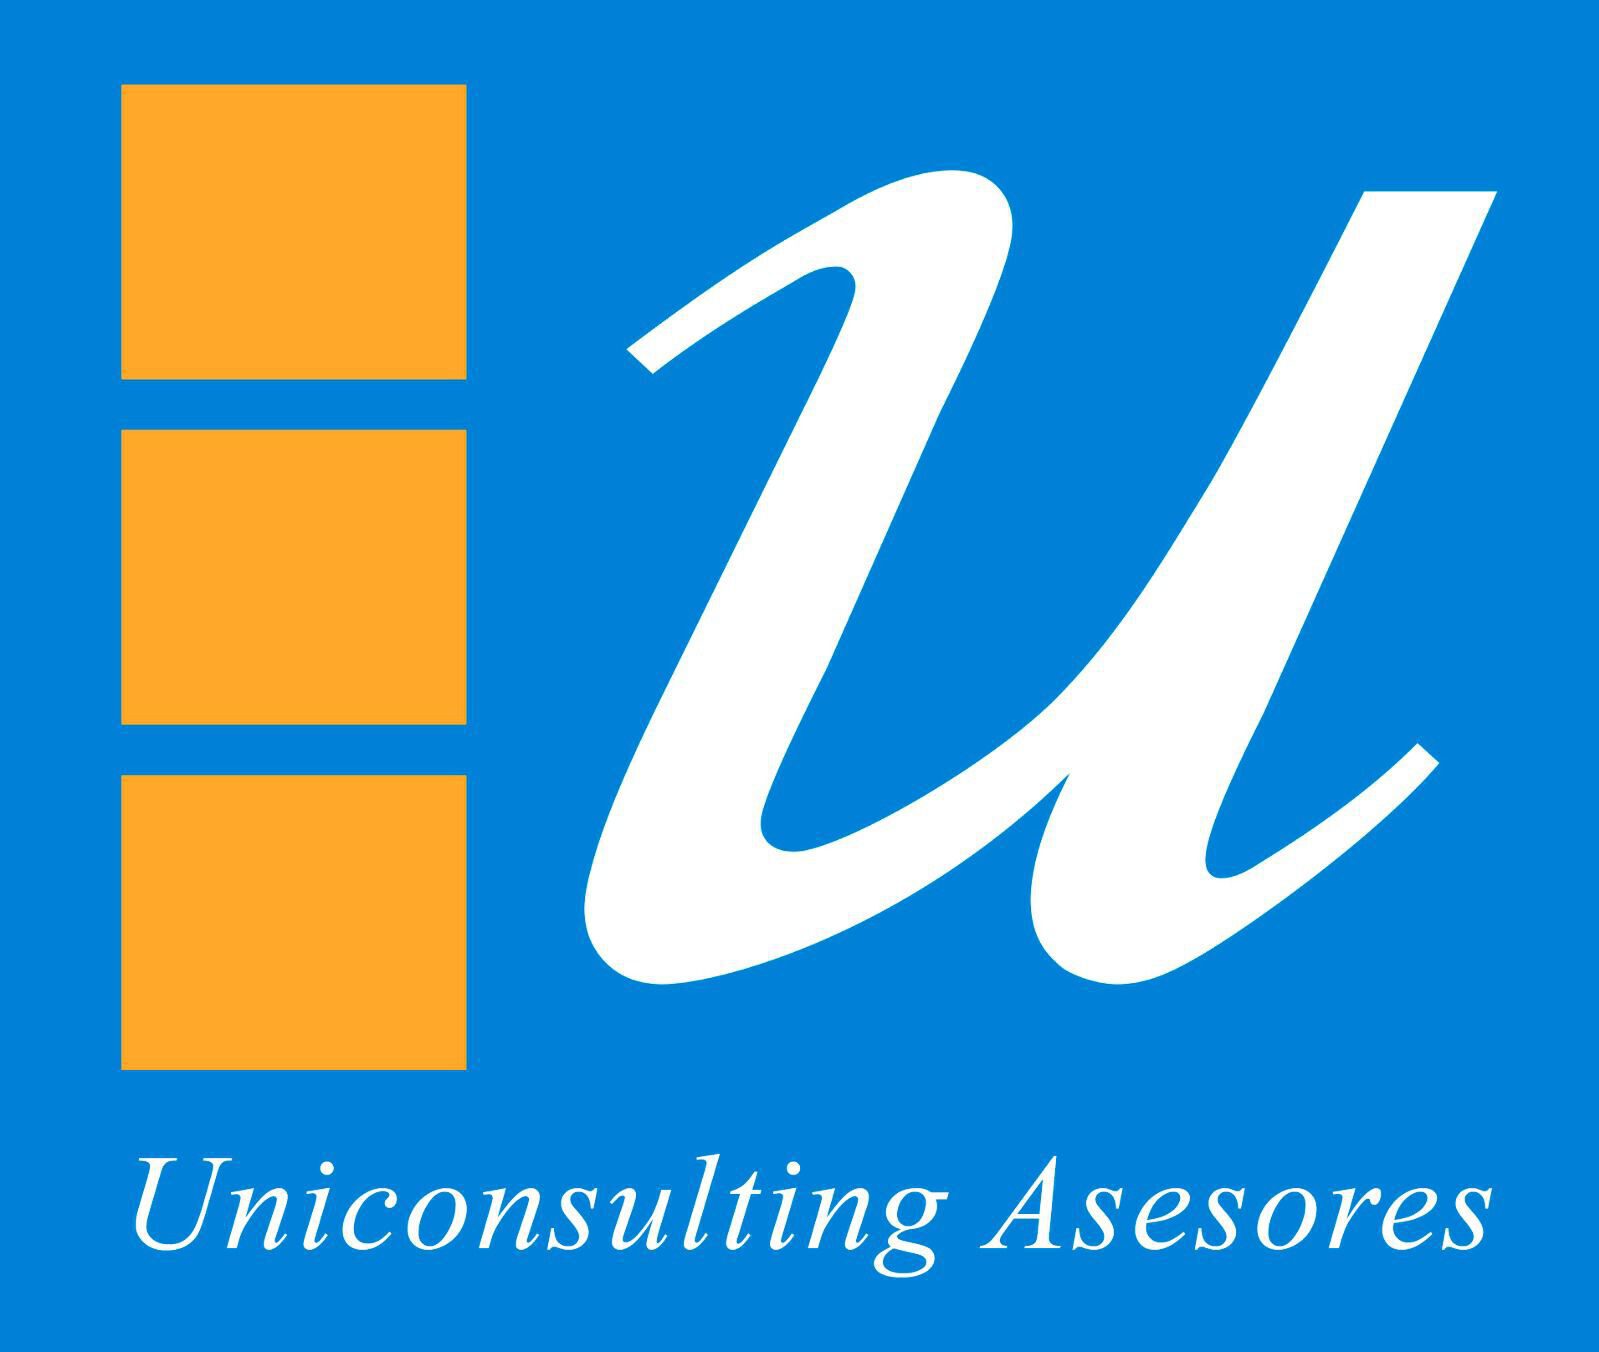 UNICONSULTING ASESORES